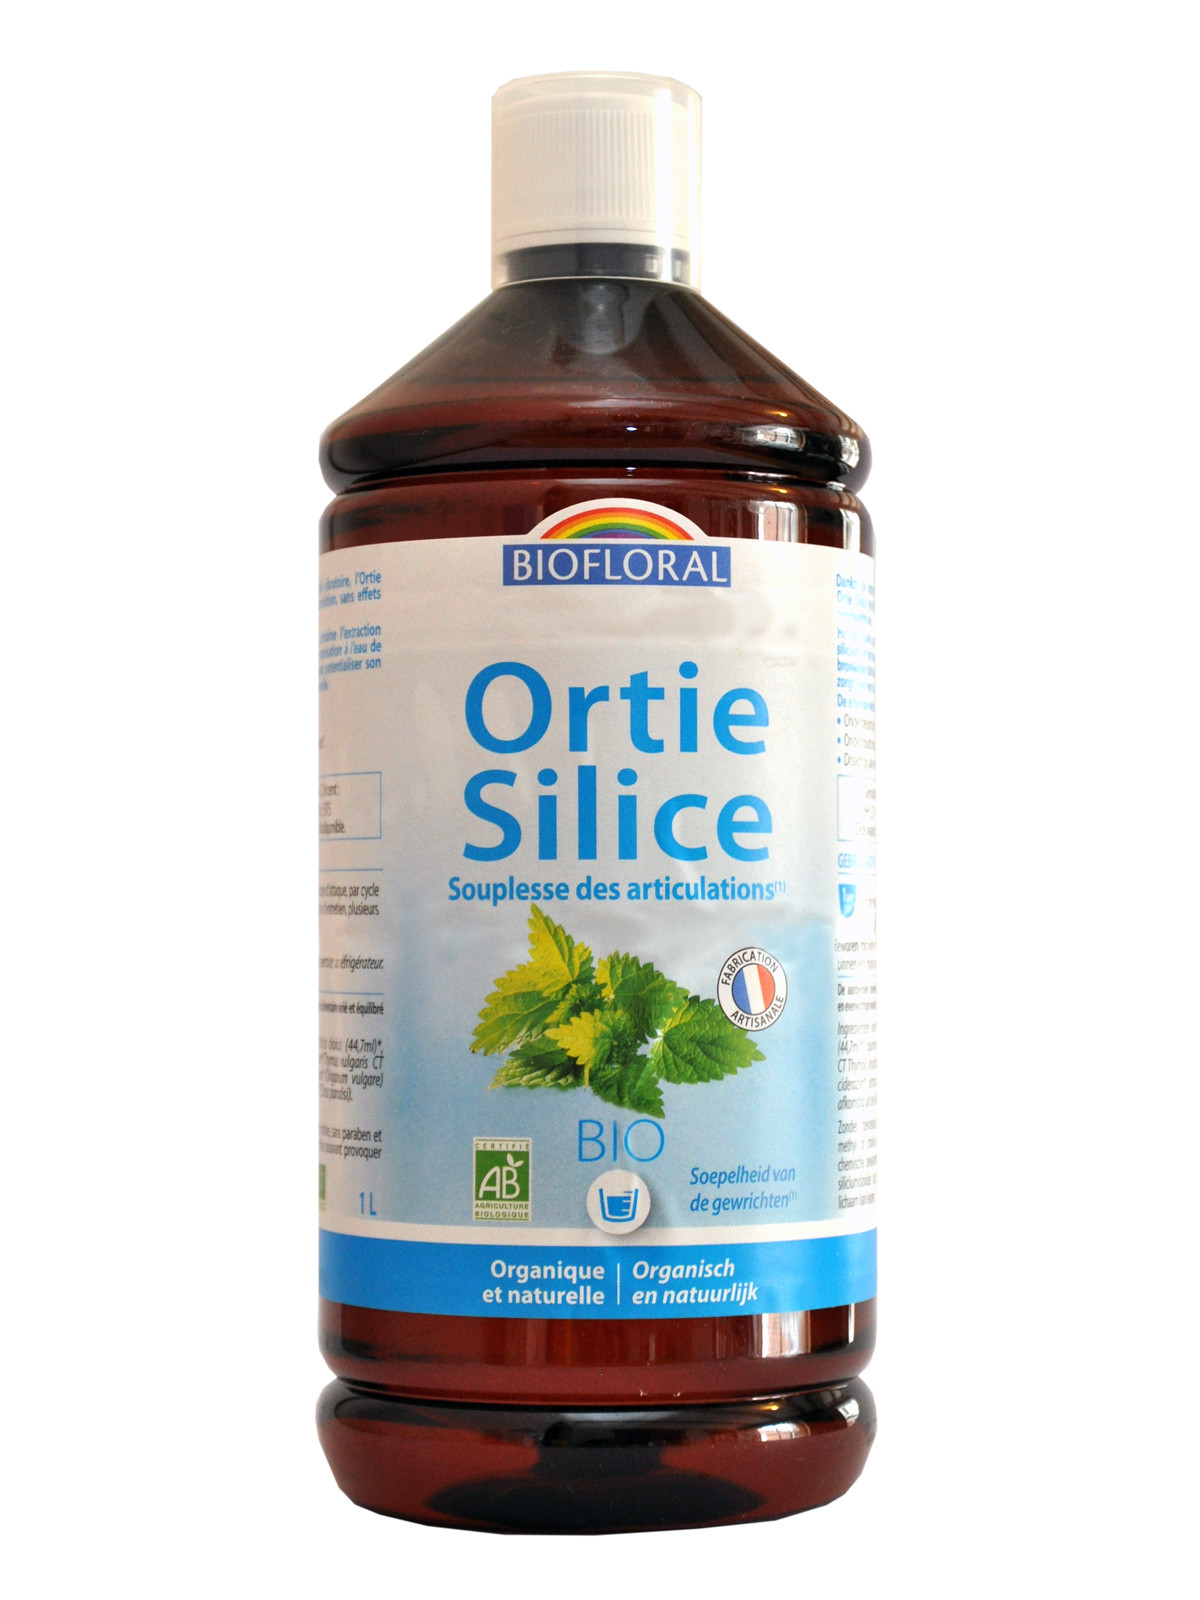 Ortie Silice 1 liter